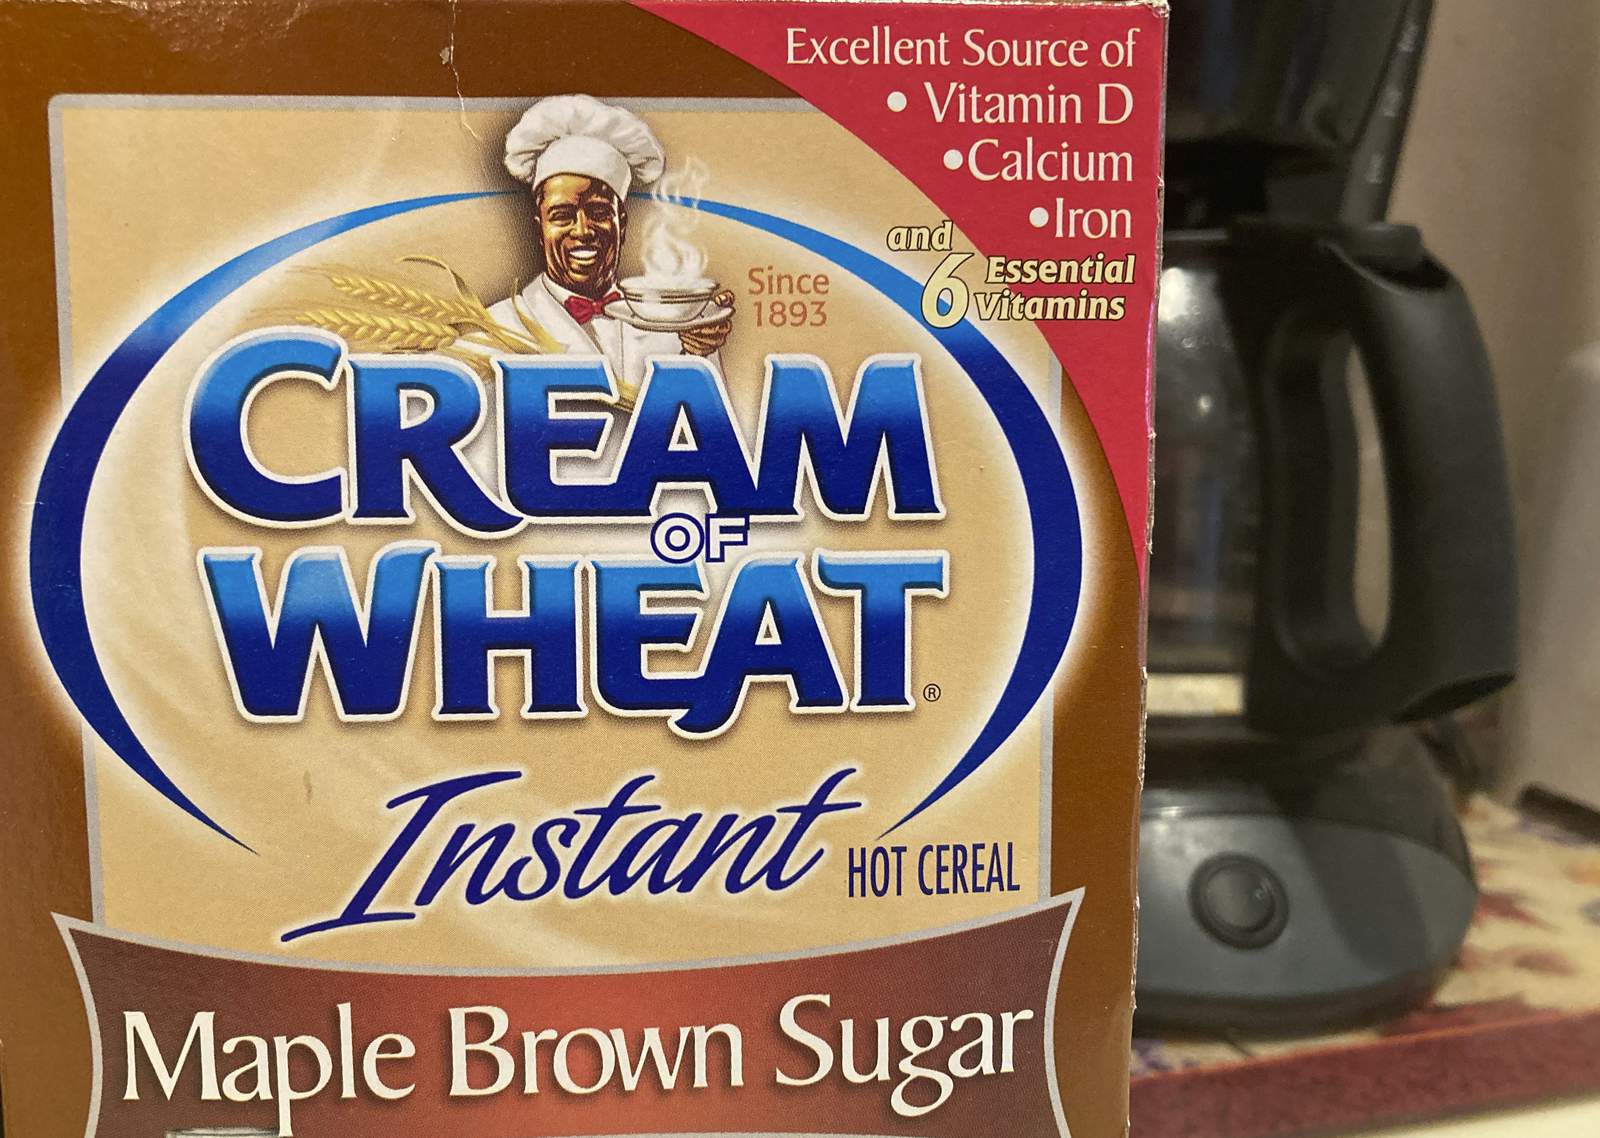 Cream of Wheat, Mrs. Butterworth confront race in packaging